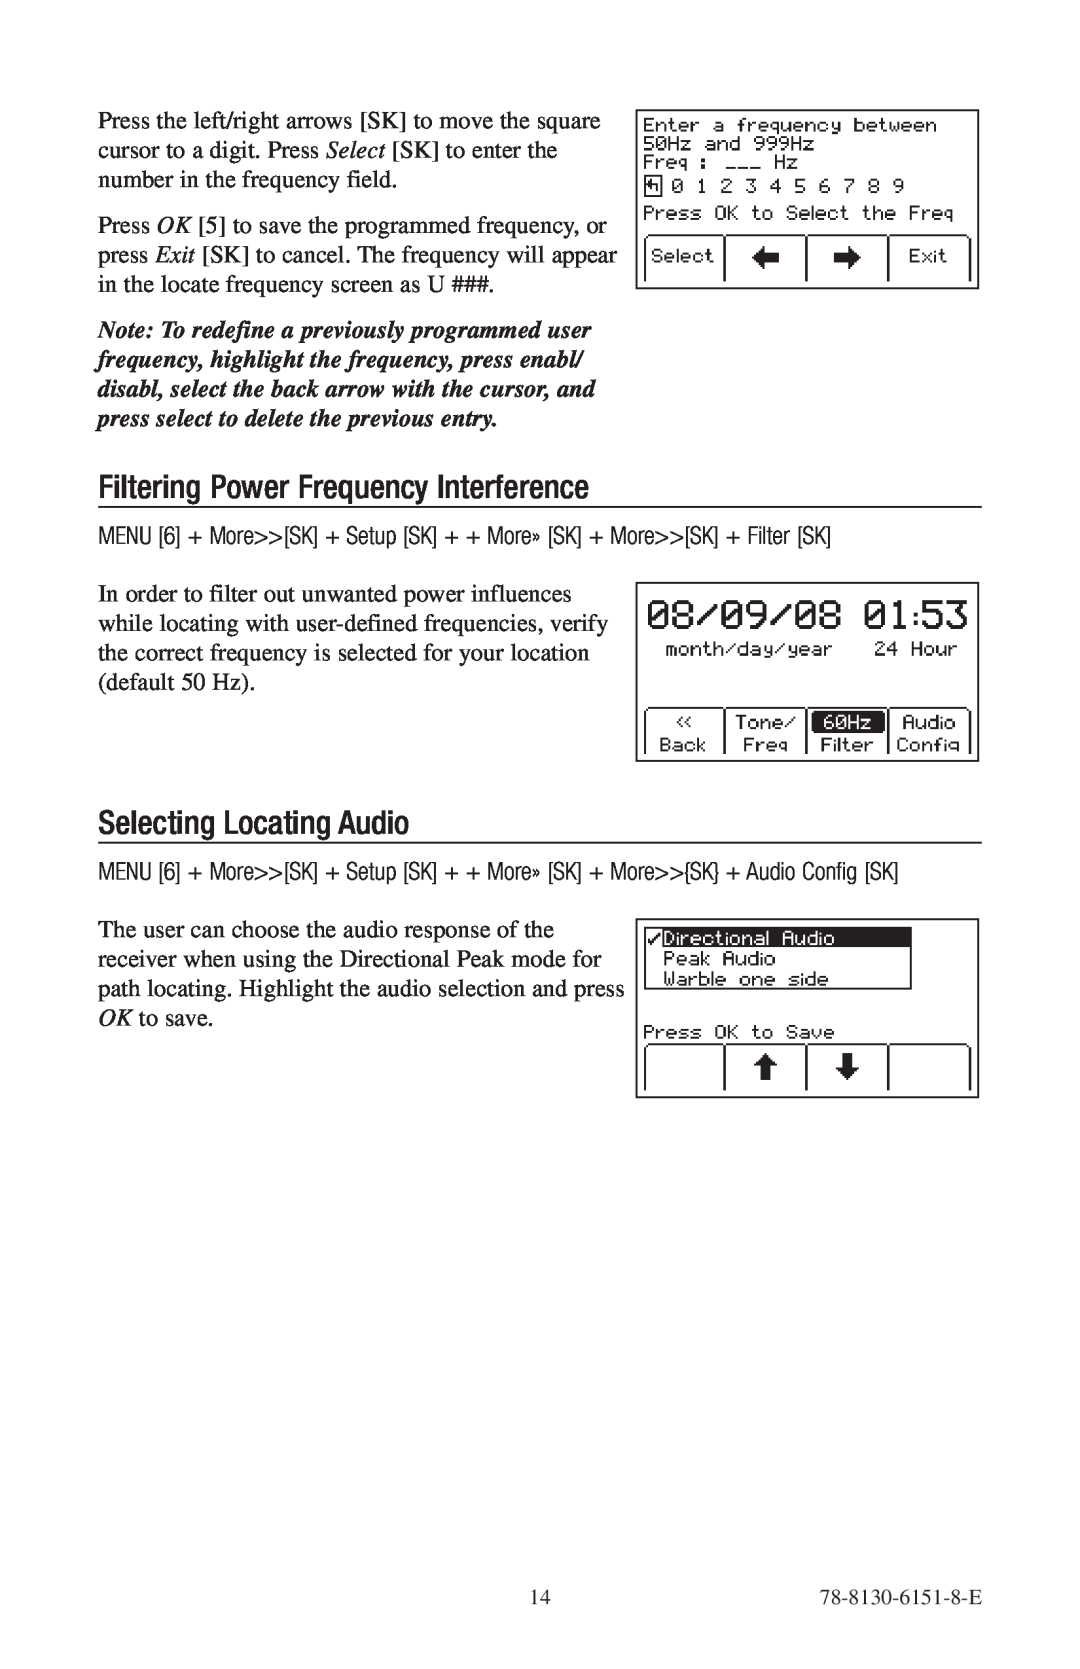 3M 2273ME-iD, 2250ME-iD manual Filtering Power Frequency Interference, Selecting Locating Audio, 78-8130-6151-8-E 